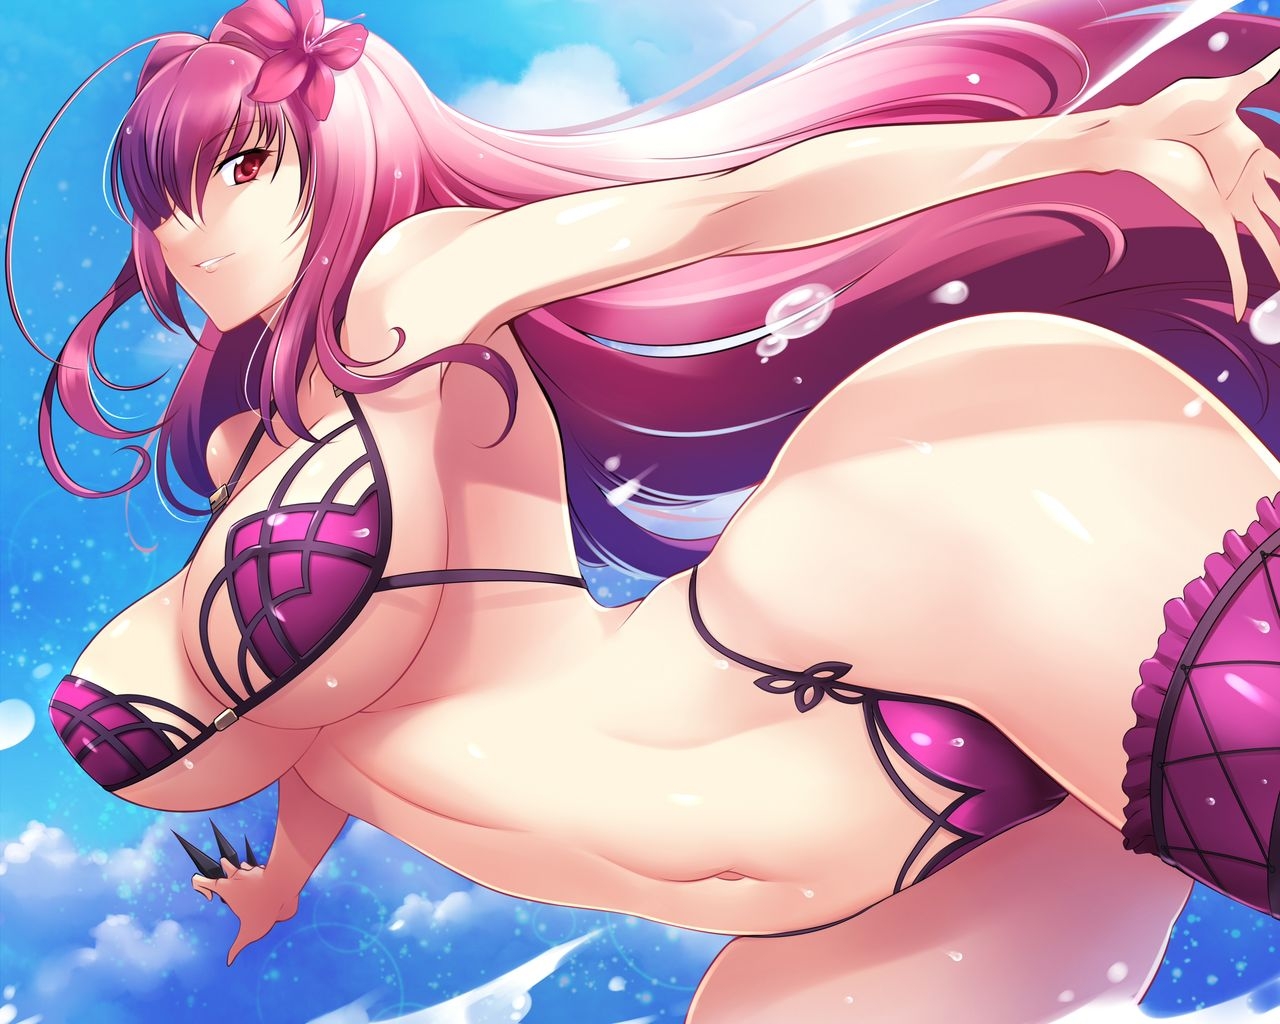 Scathach Fate/Grand Order 18